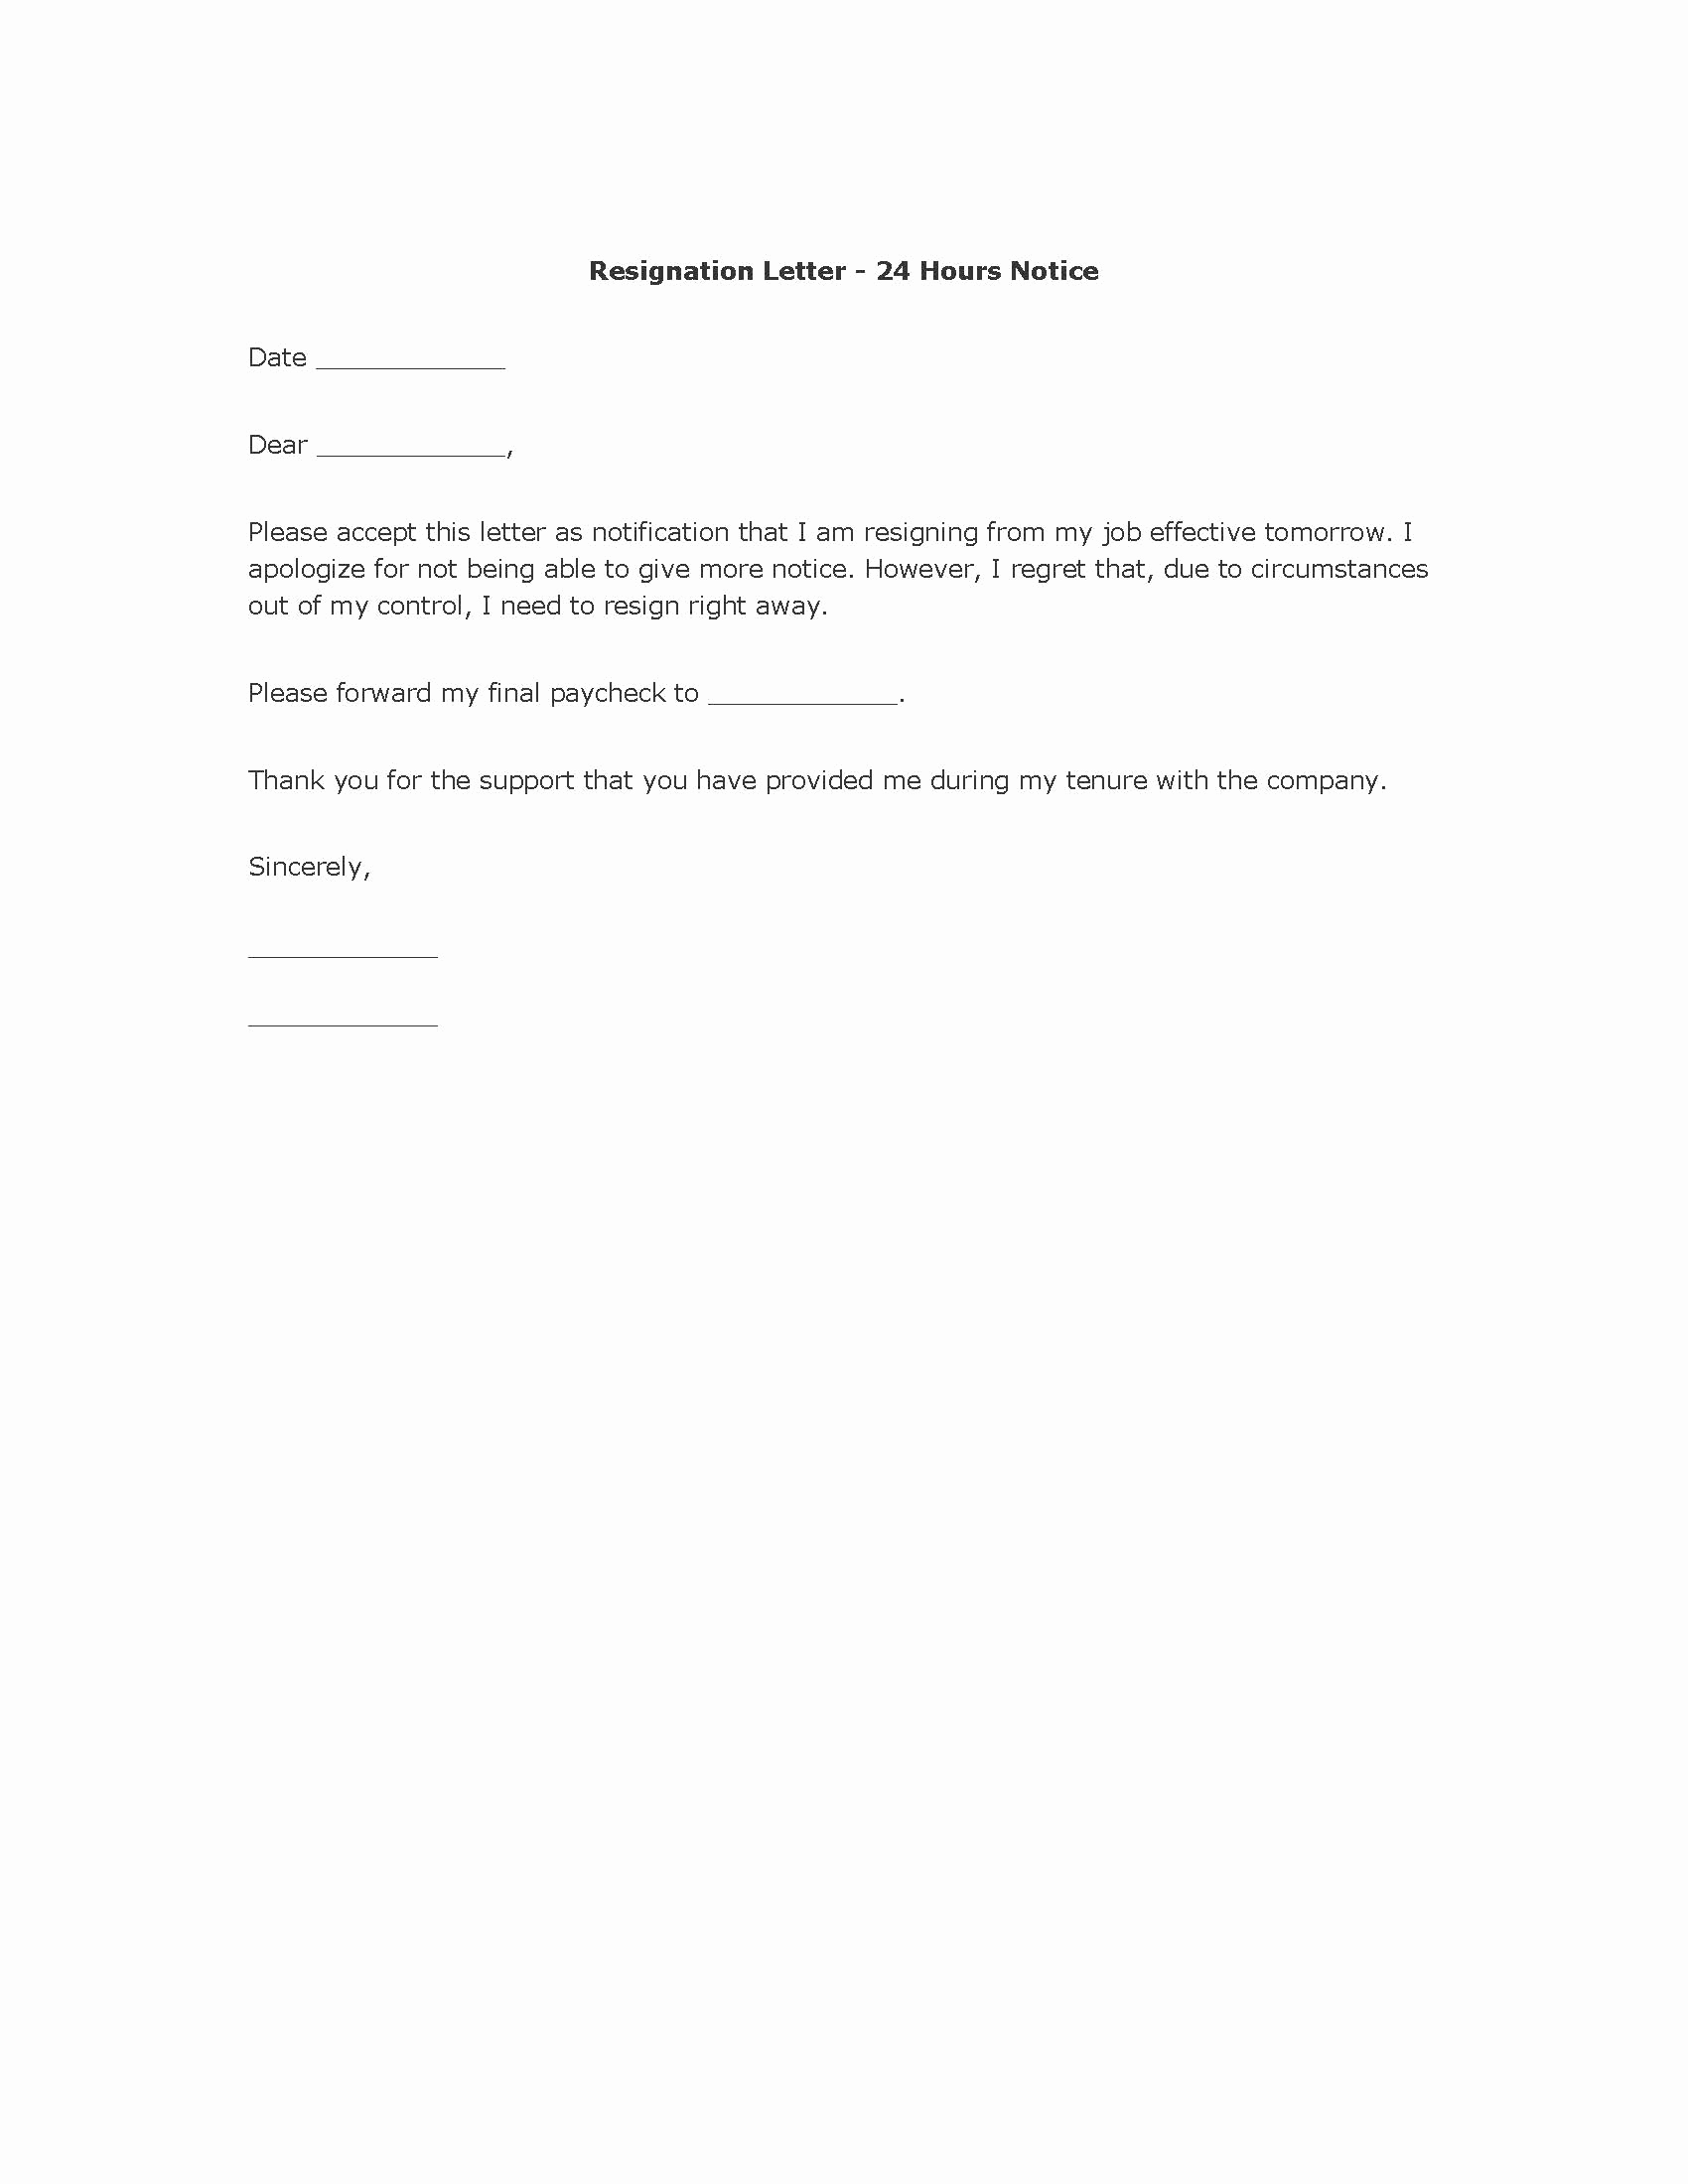 Letter Of Resignation Templates Beautiful Free Resignation Letter Template 24 Hour Notice